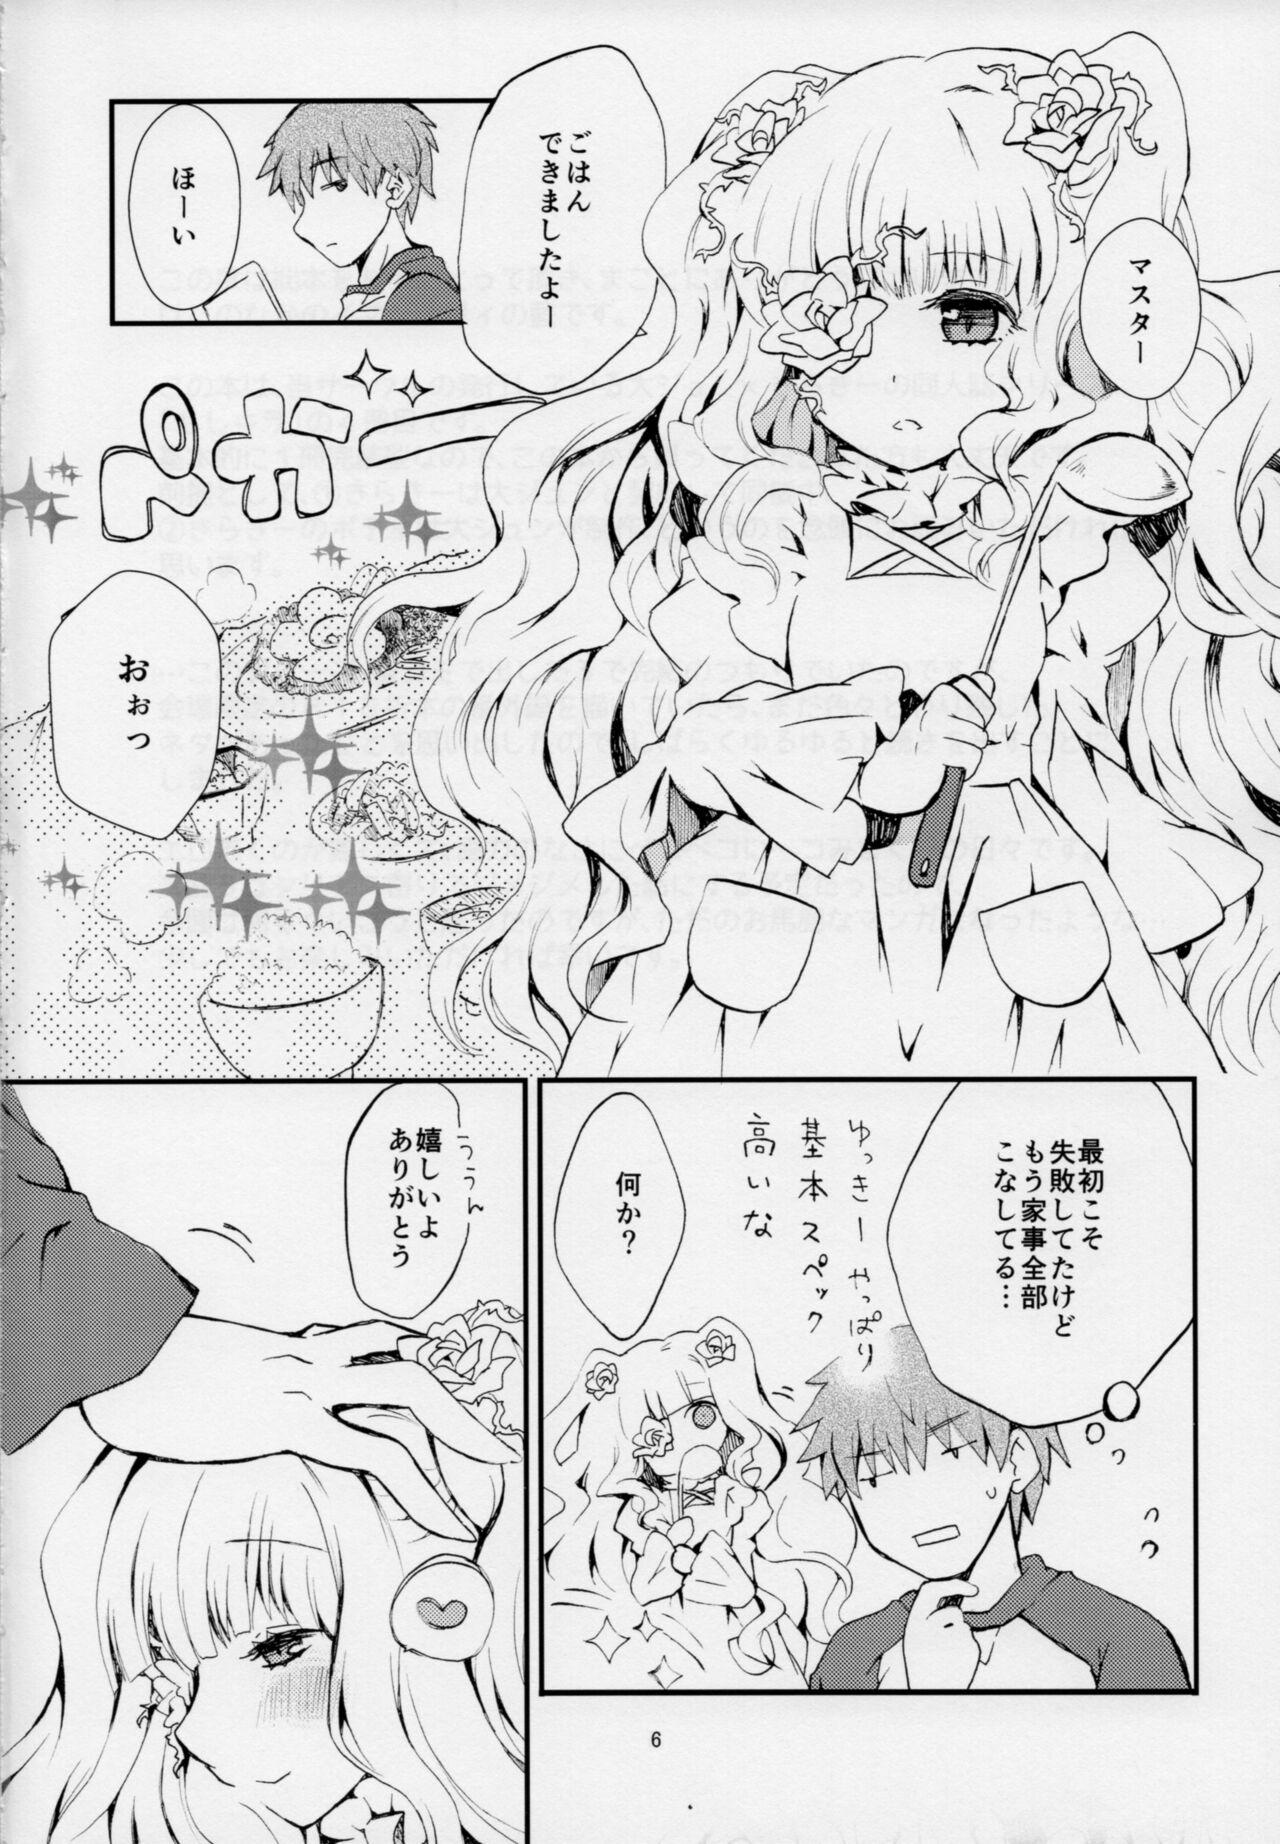 Gay Group Eat me, Drink me - Rozen maiden Fantasy - Page 3